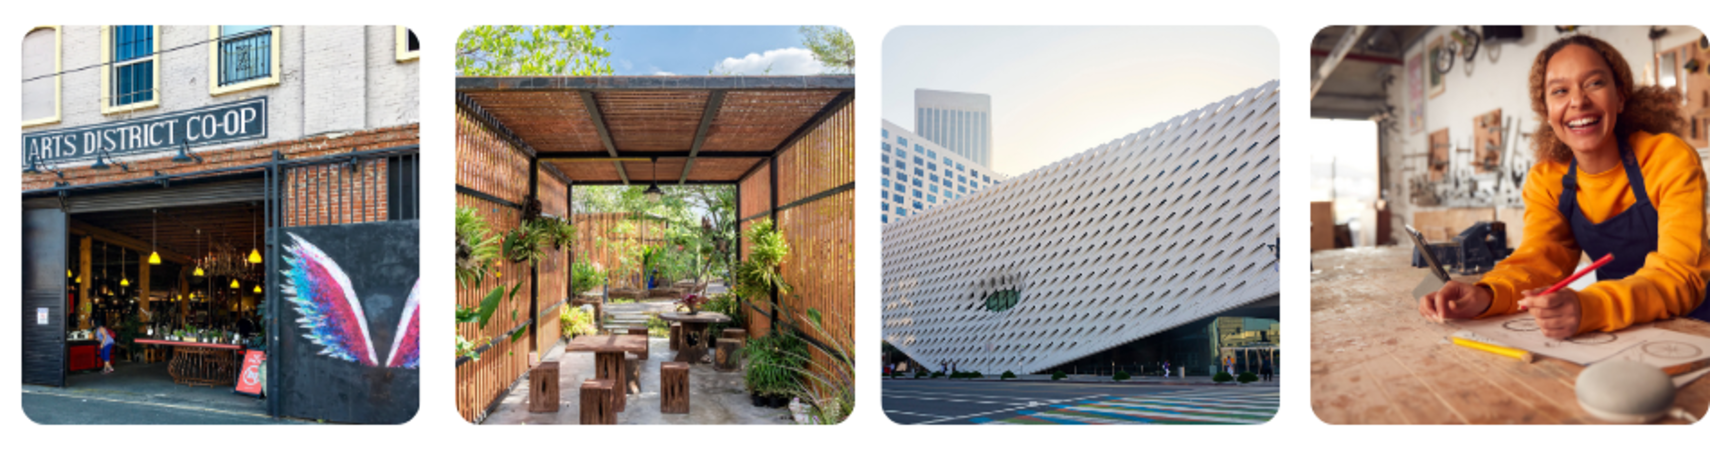 For example left to right: Downtown LA Arts District; Community Garden; The Broad Art Museum; Maker Spaces